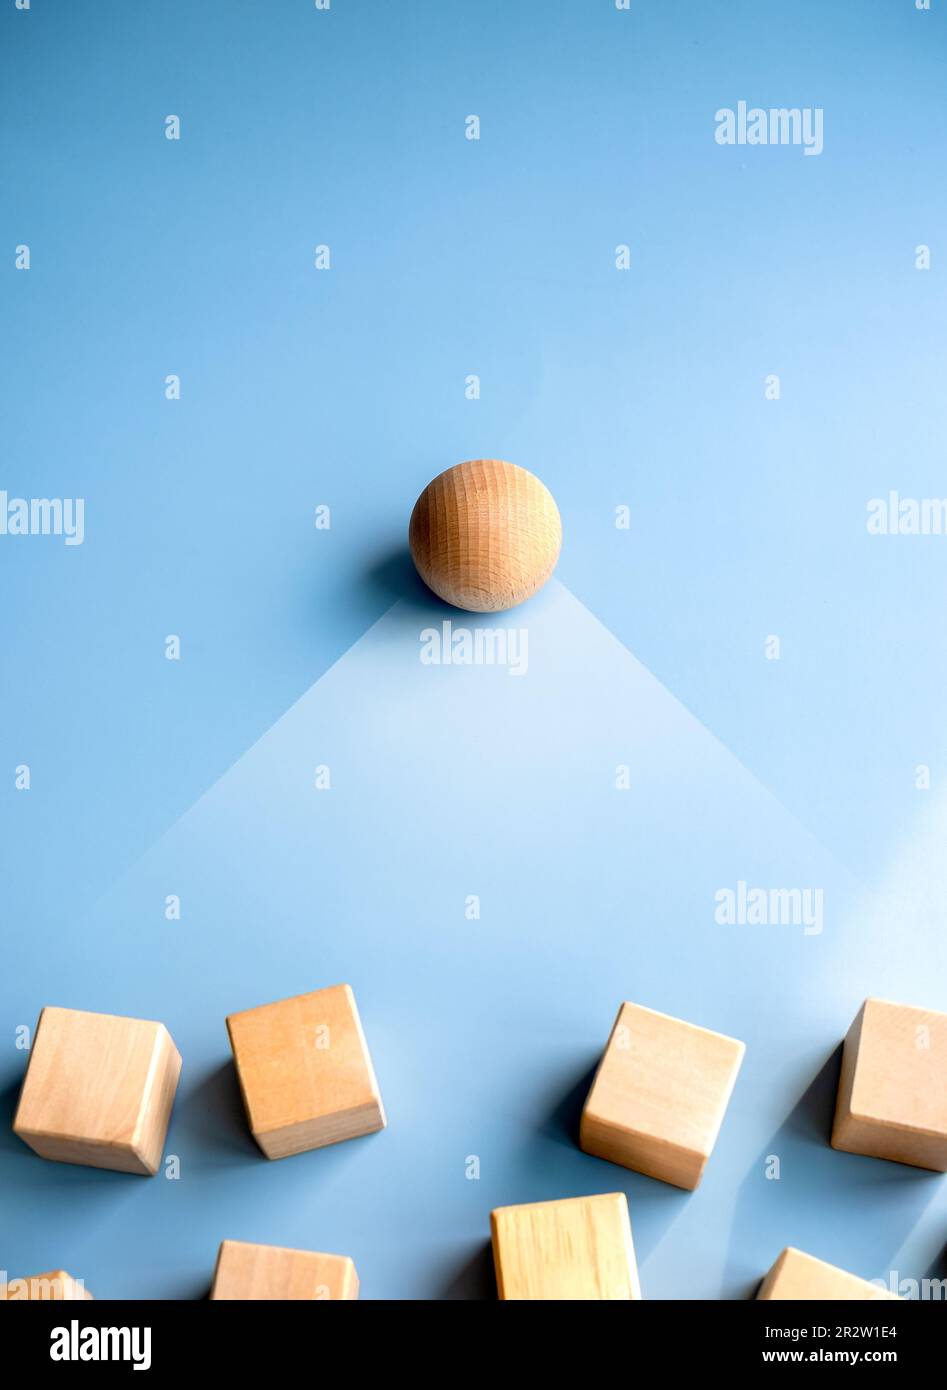 Wooden sphere stand alone at the leader position of group of wood cube blocks on blue background, vertical style. Leadership, business success, unique Stock Photo